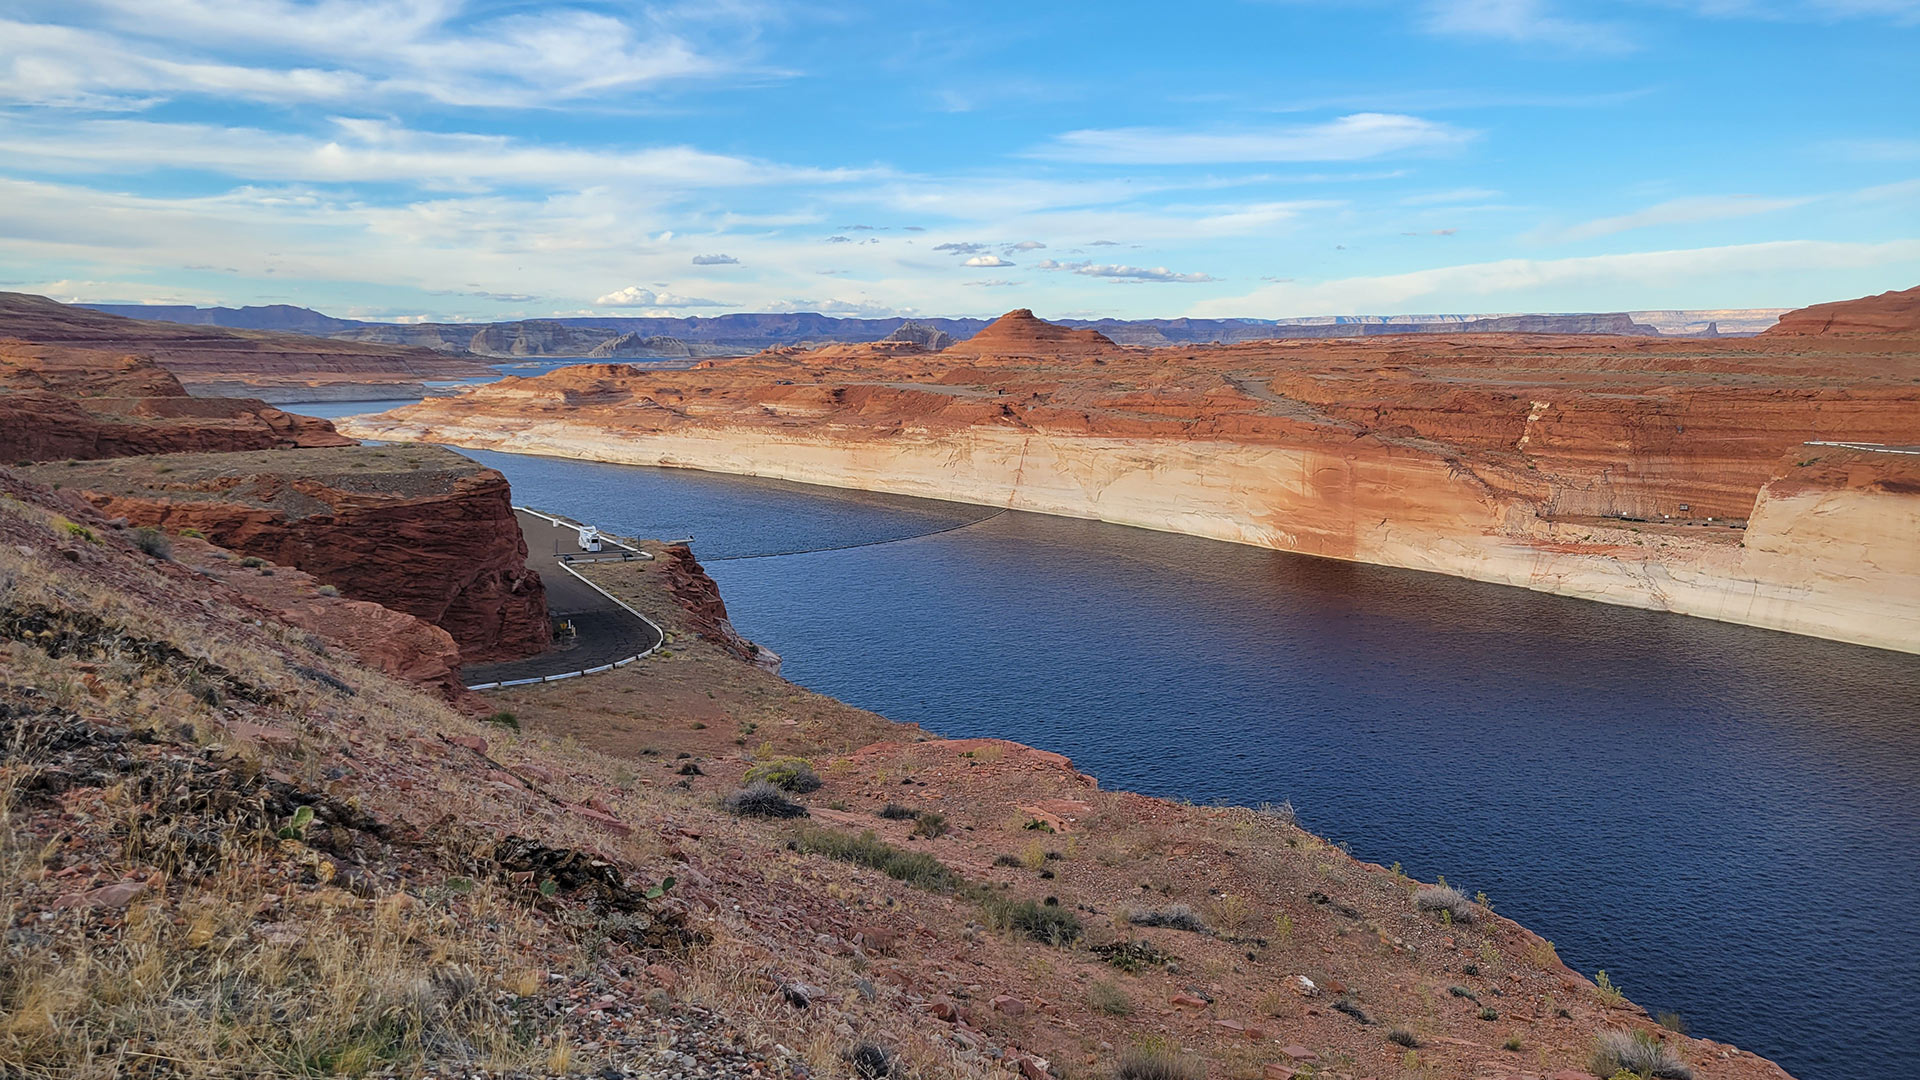 Bands of discolored rock show that Lake Powell's water levels are lower than they have been for much of its past.